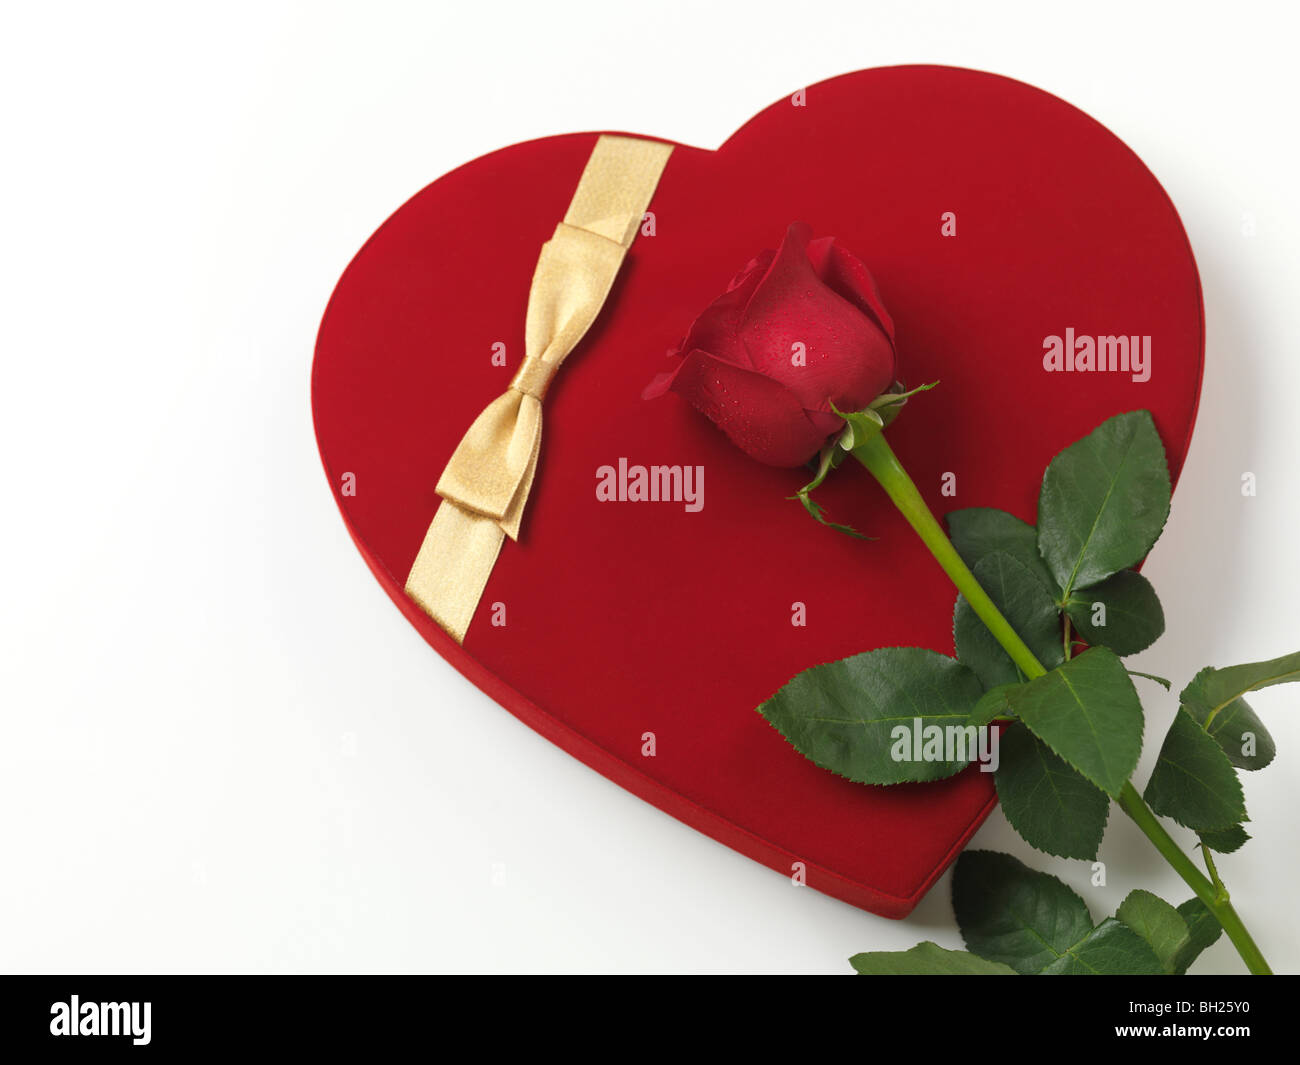 Red heart-shaped gift box and a red rose isolated on white background Stock Photo